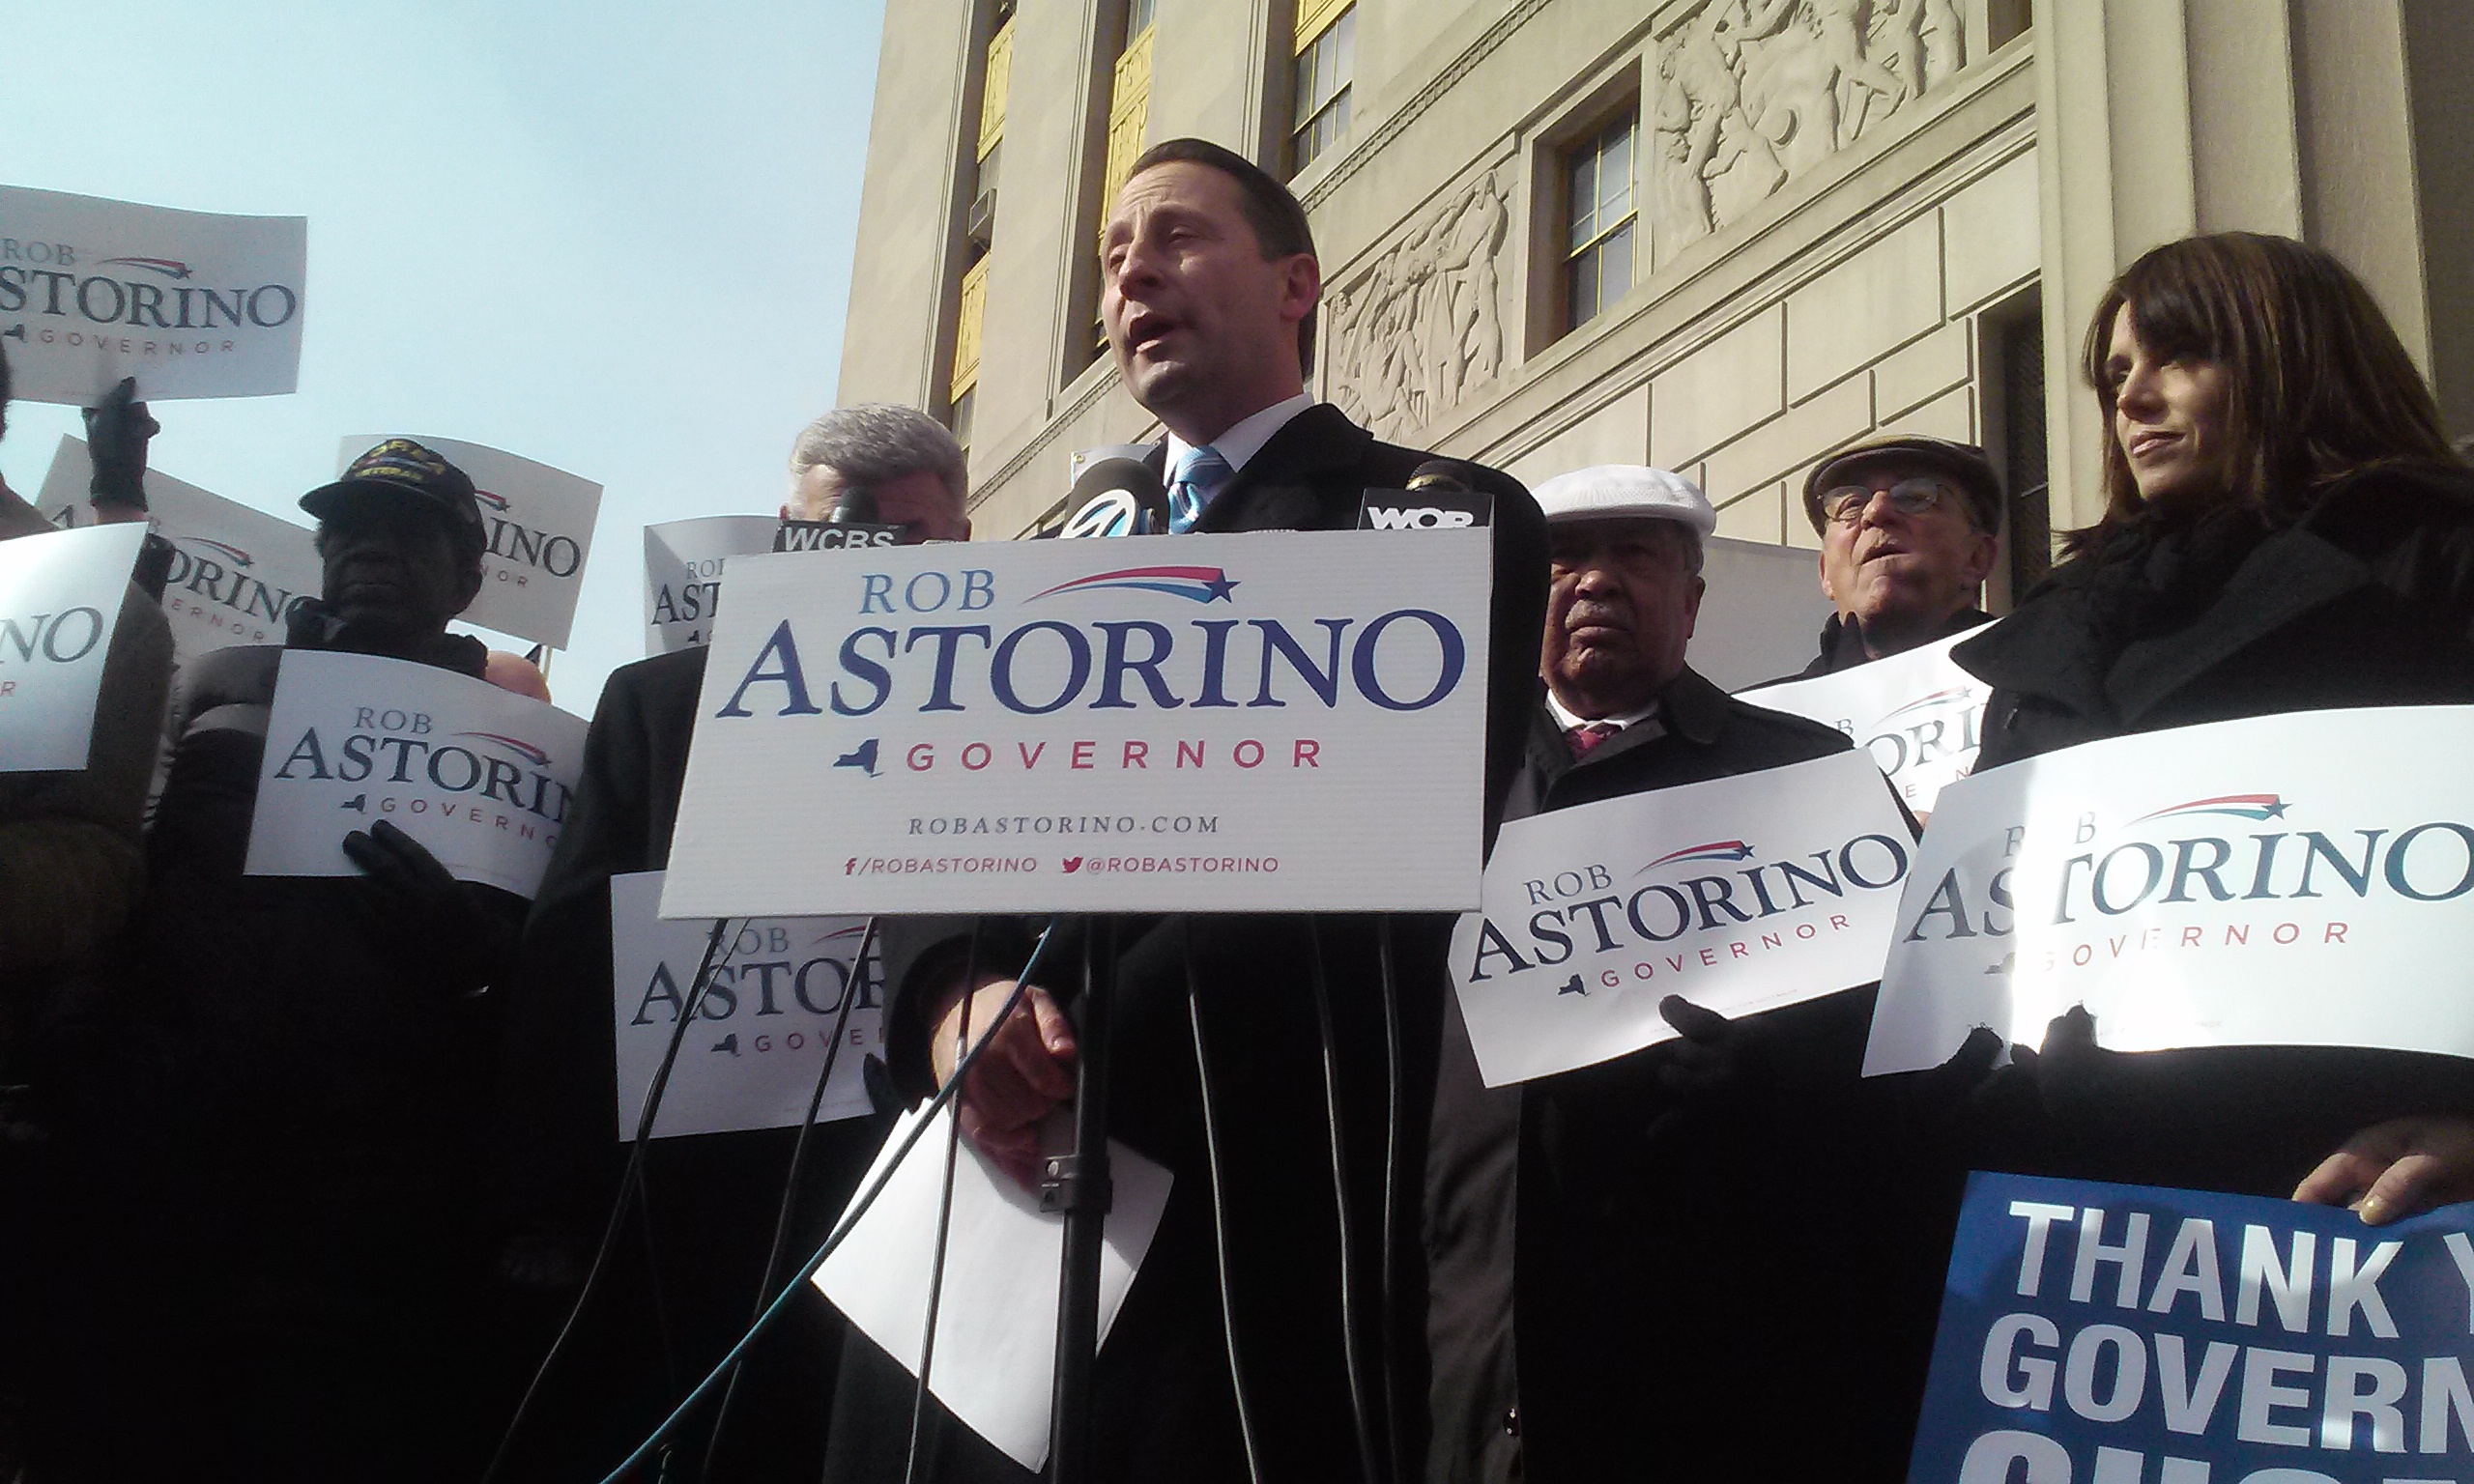 Rob Astorino launches his campaign next to a "Thank You Governor Cuomo" sign. (Observer File Photo)